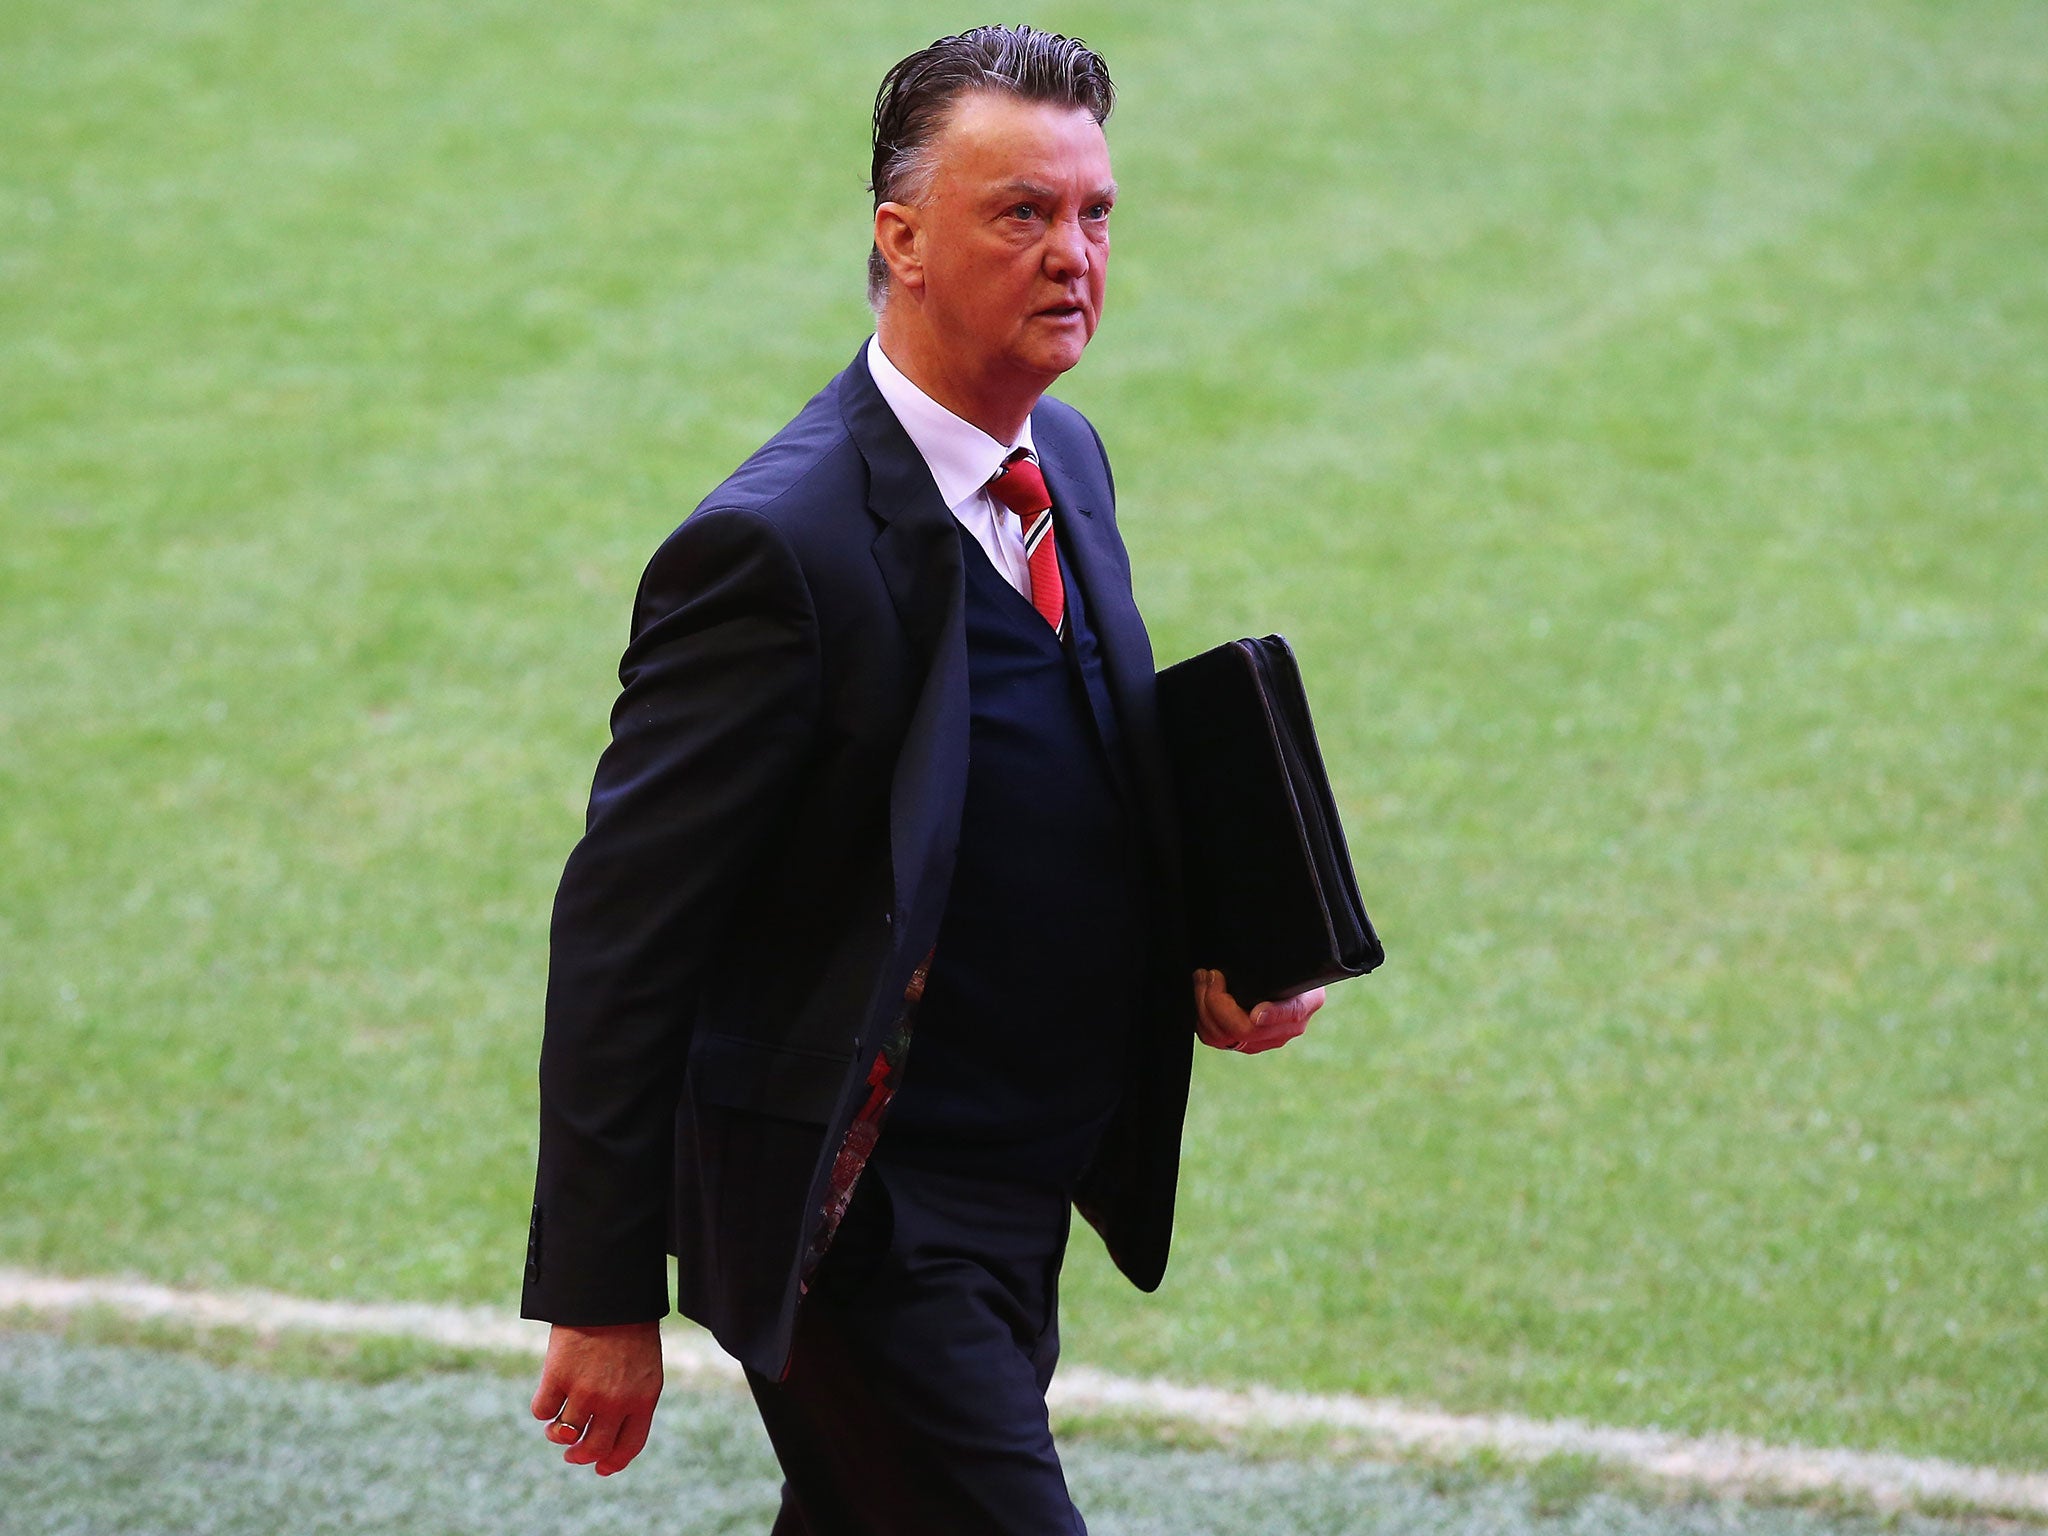 Louis van Gaal was believed to have been considering his future as Manchester United manager (Getty)